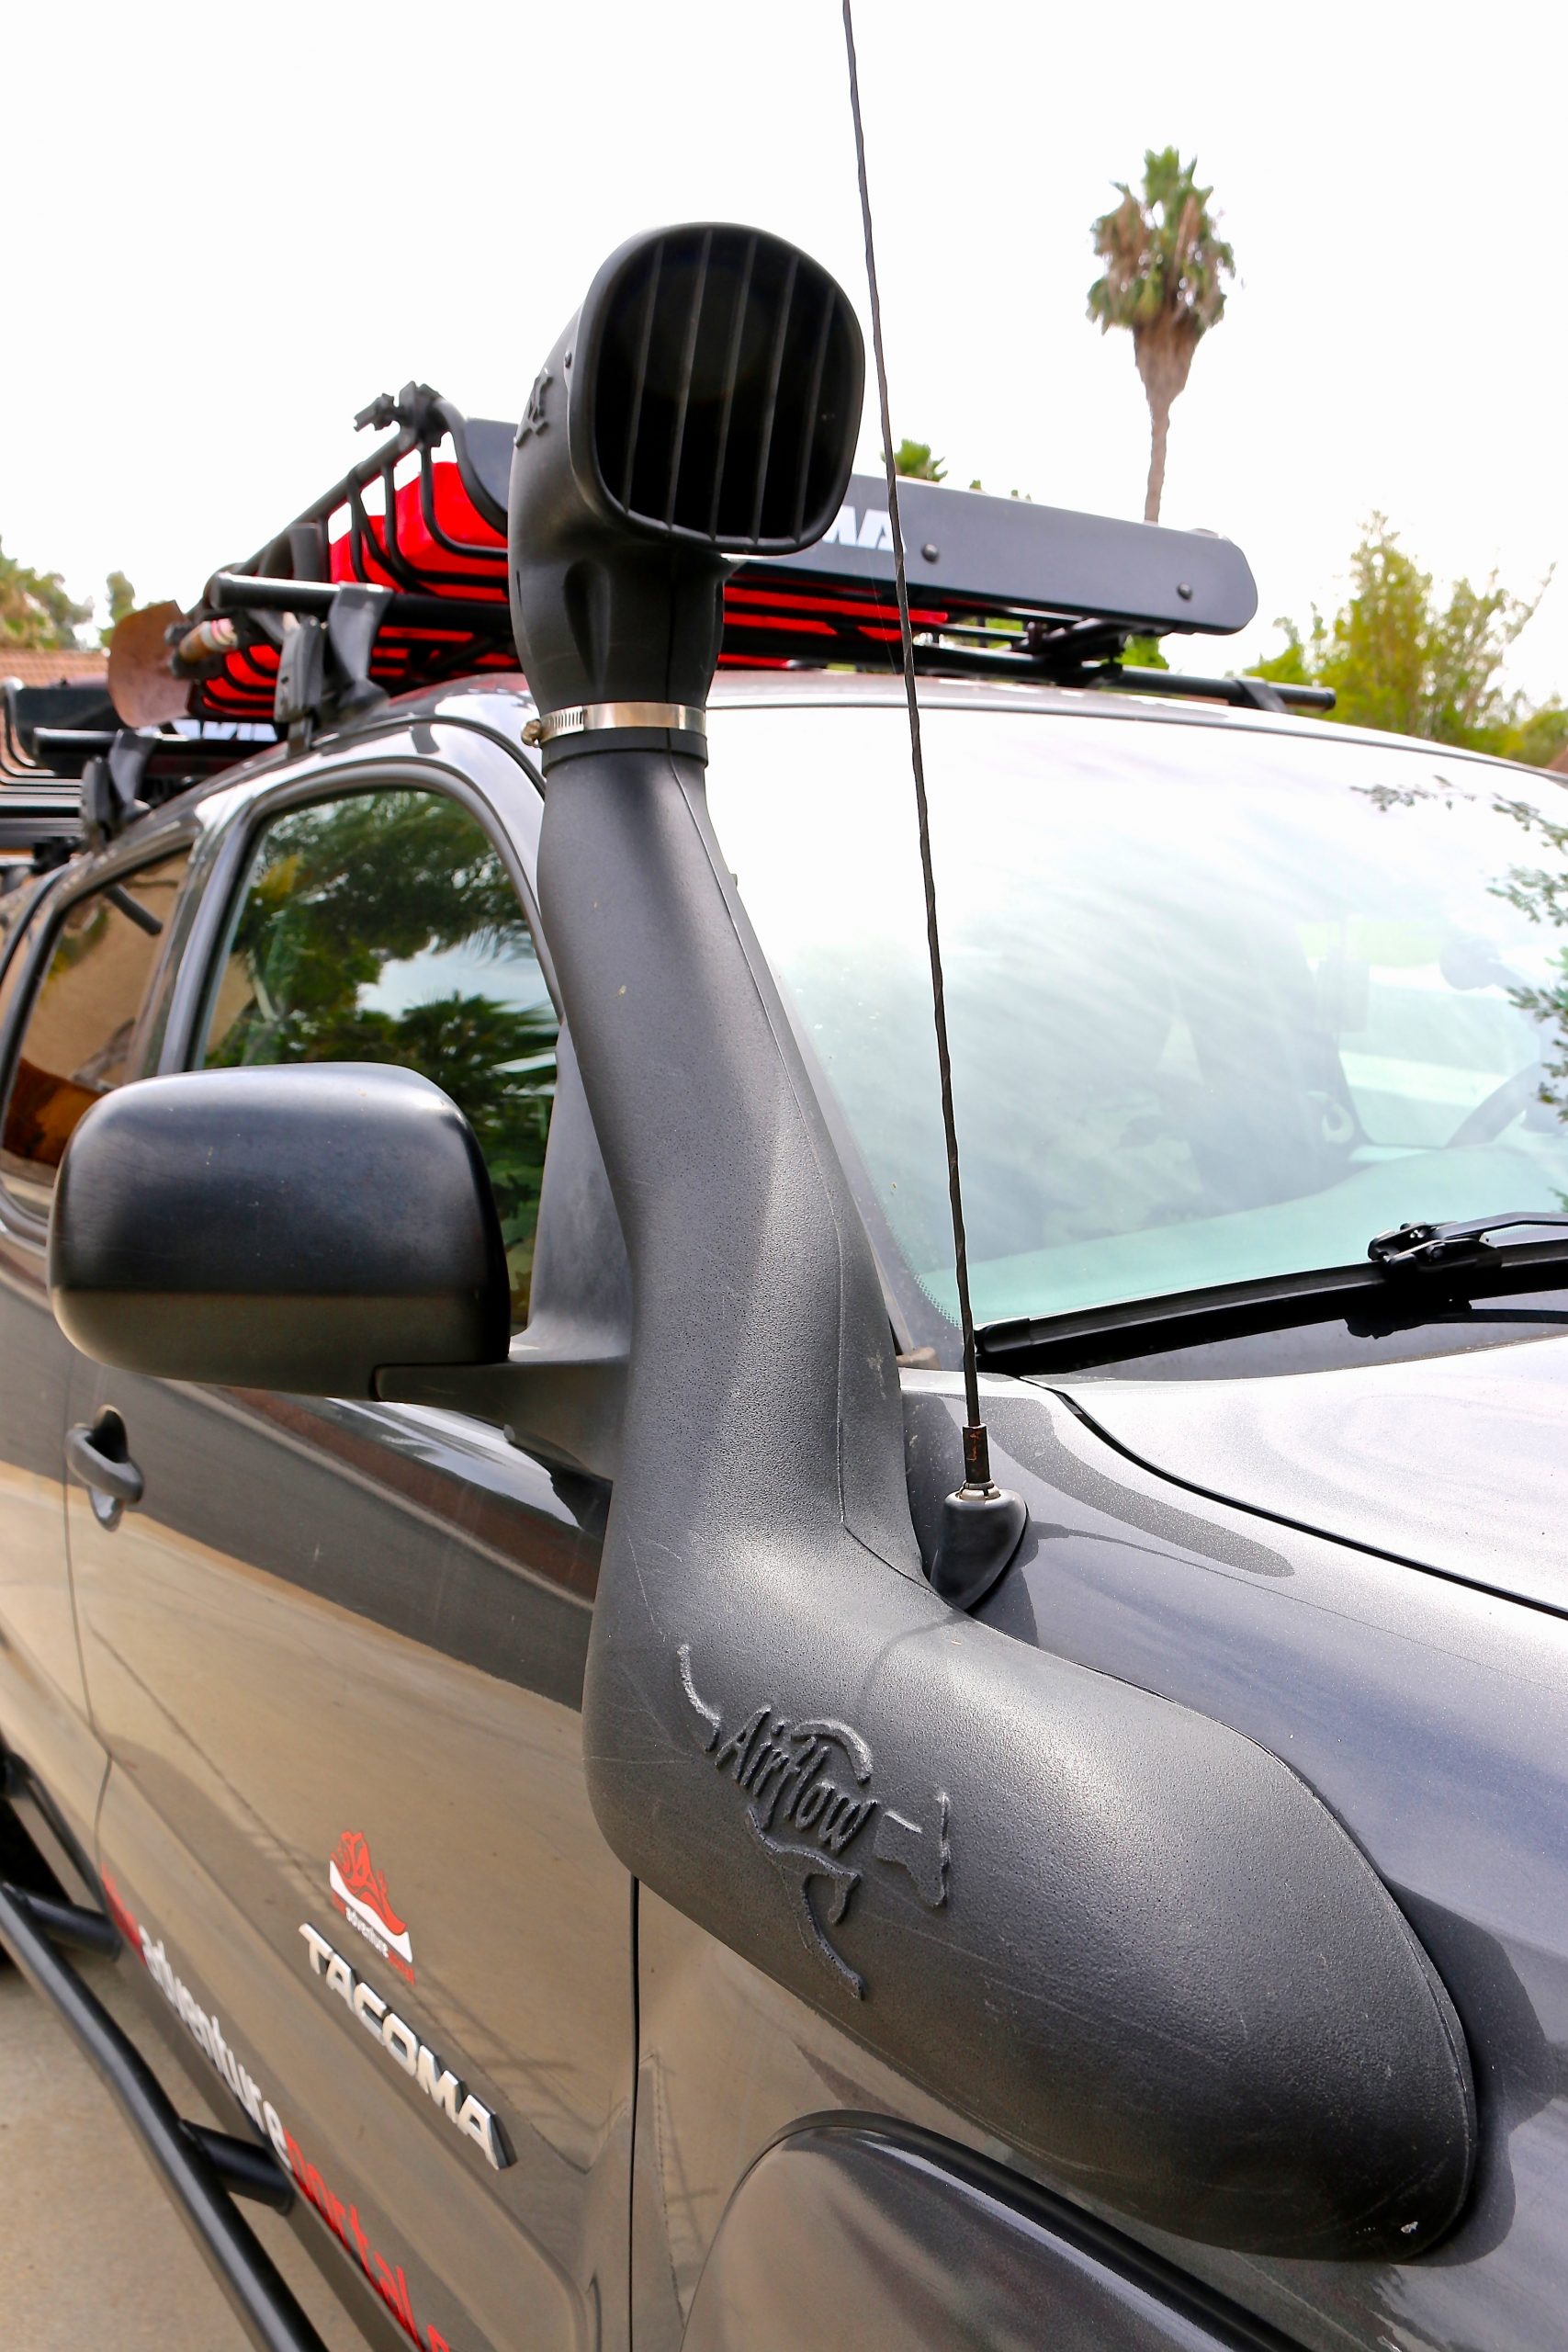 4x4 Snorkels - Do You Need One? And Which Snorkel is Right for You